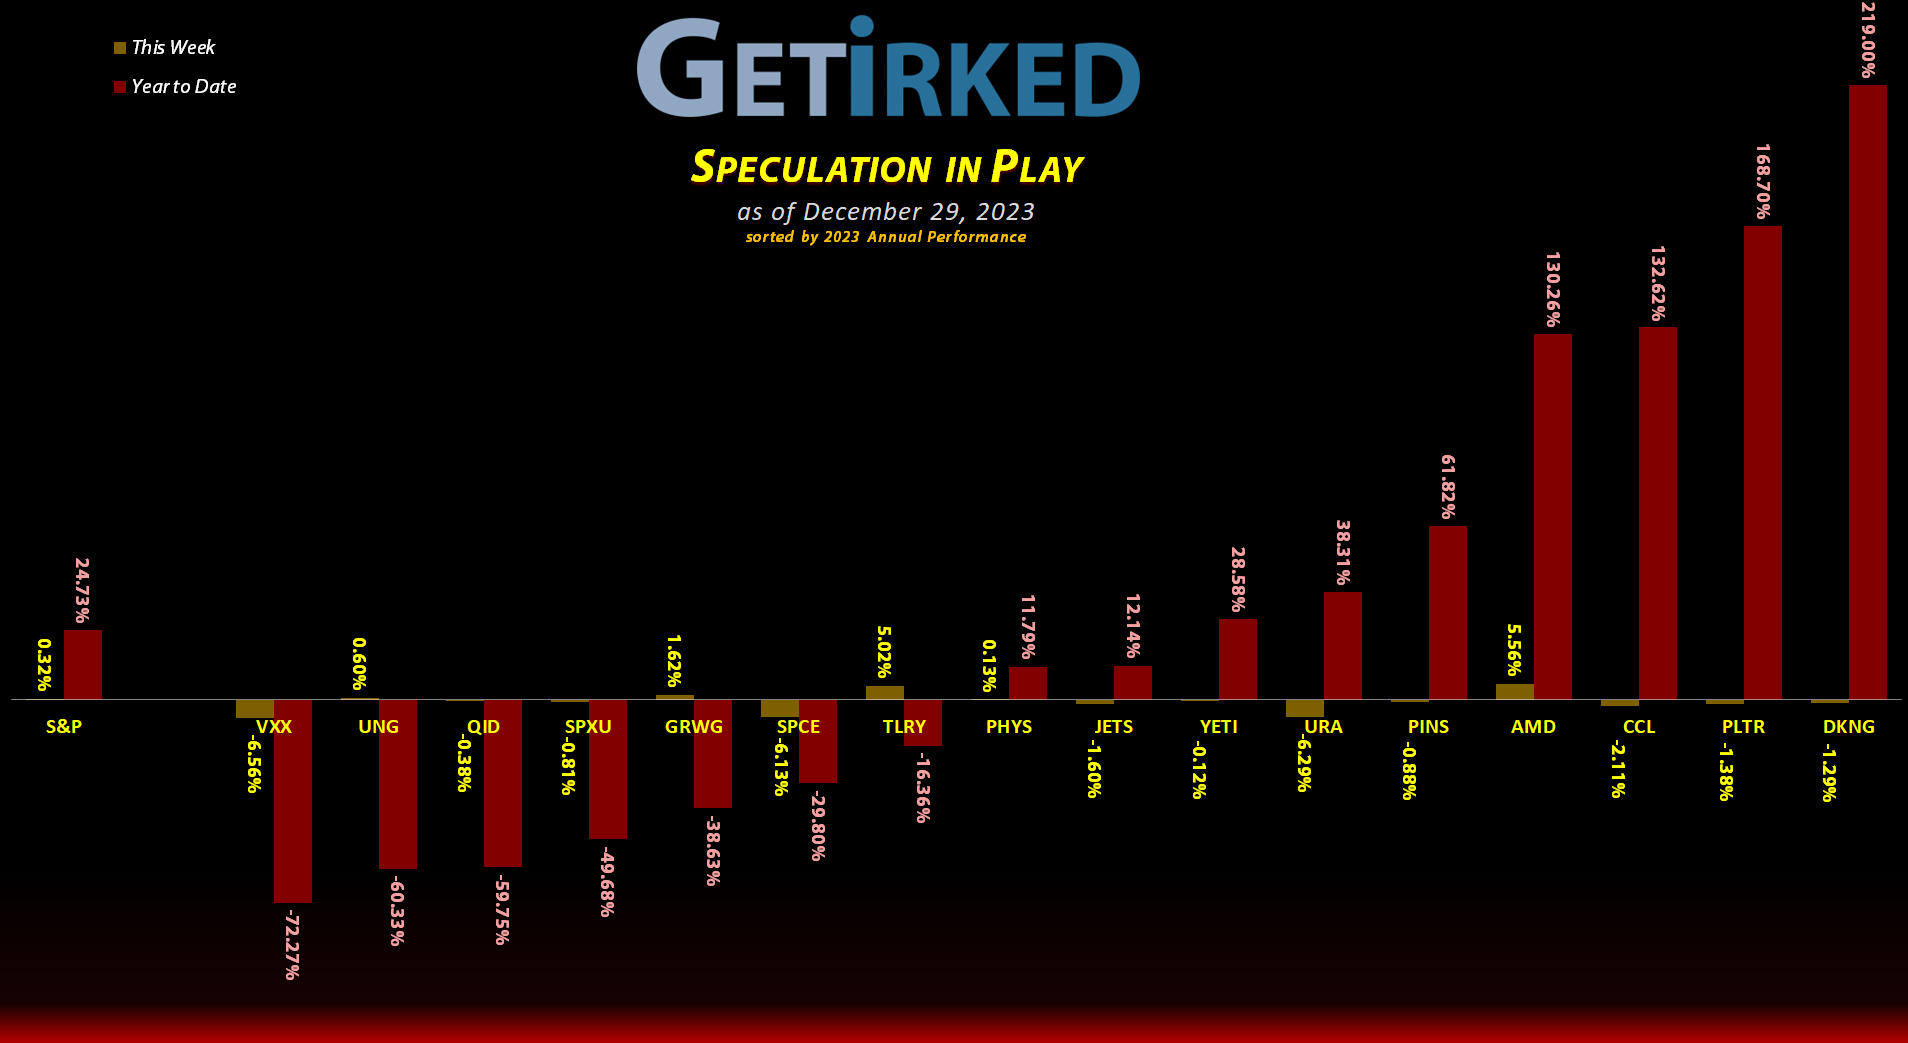 Get Irked's Speculation in Play - December 29, 2023